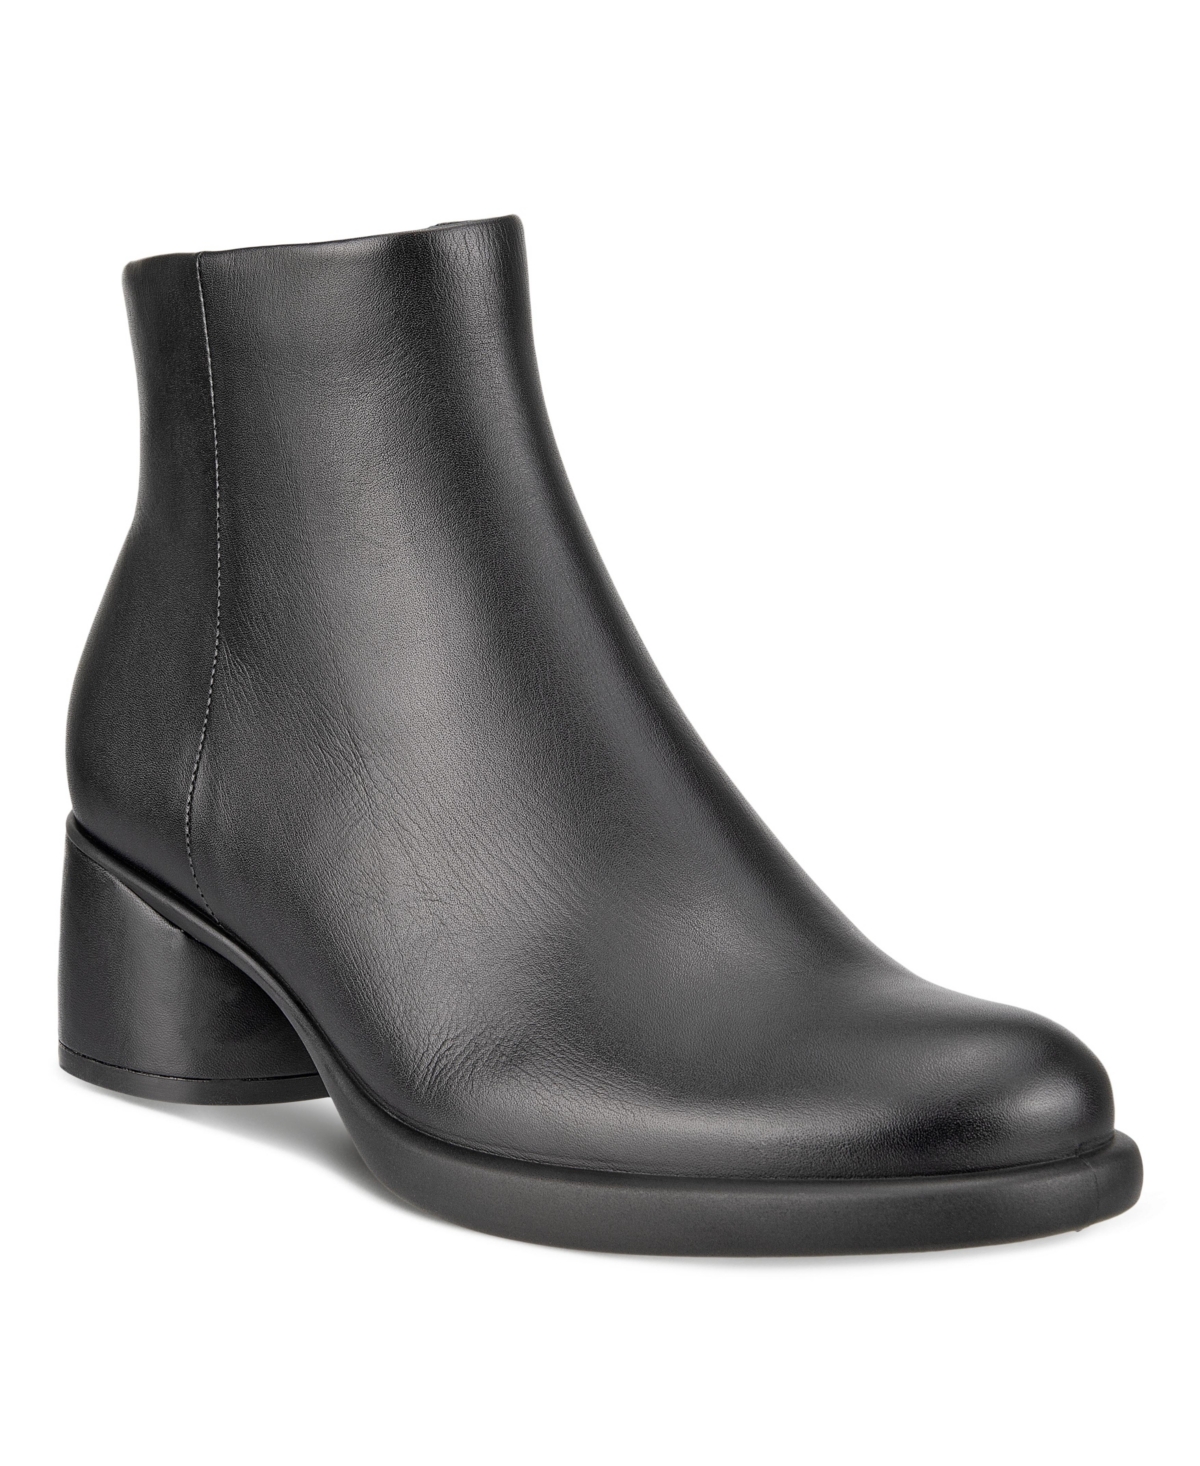 ECCO WOMEN'S SCULPTED LX 35MM ANKLE BOOT